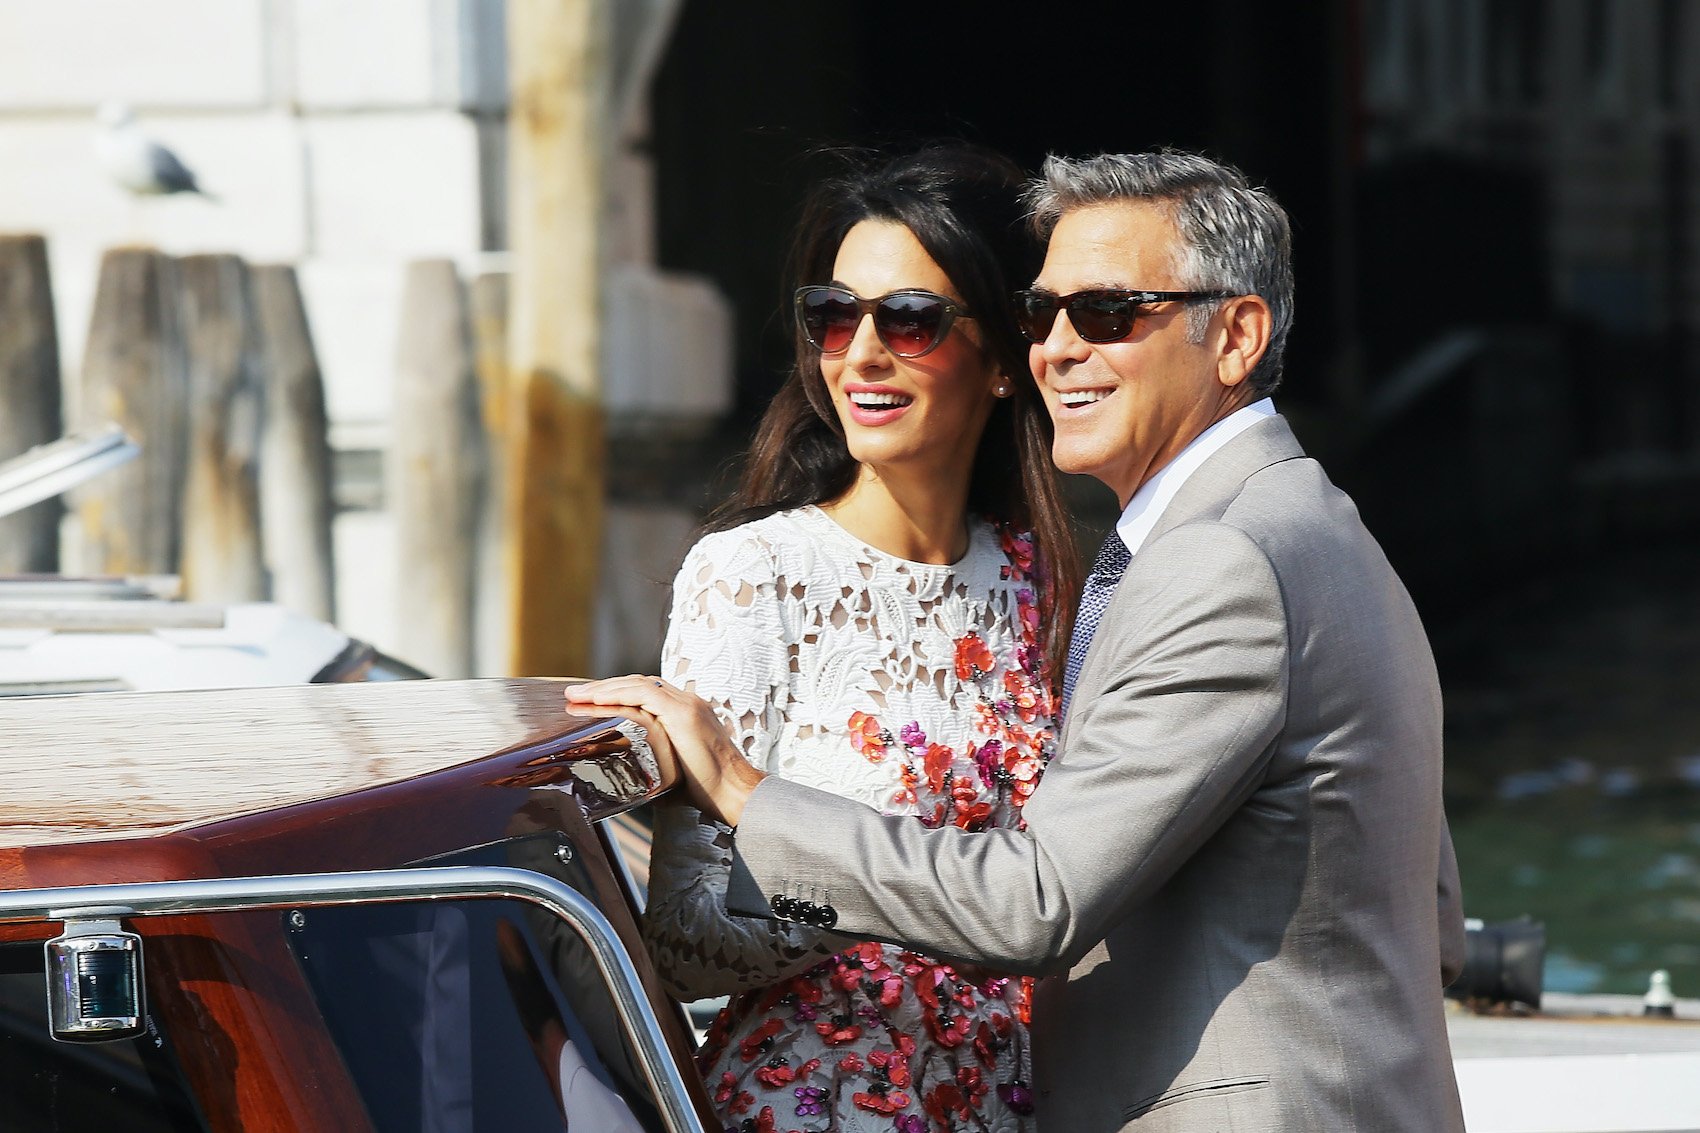 George Clooney and Amal Clooney in Venice, Italy